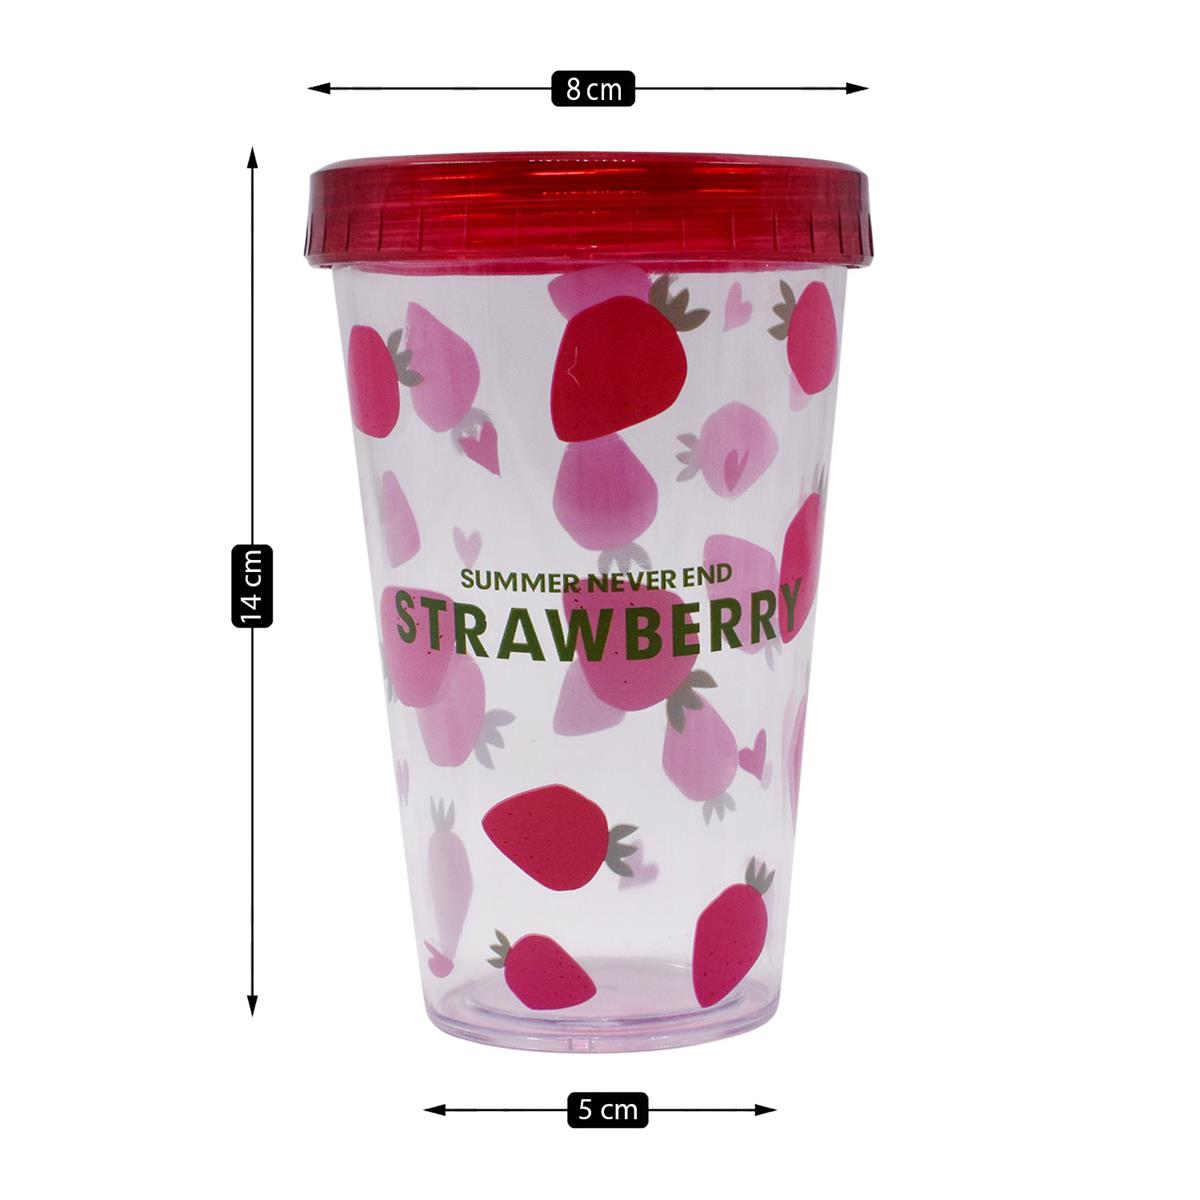 Acrylic Sipper, Cup, Tumbler Frosted with Straw and Lid - 300ml (PH-006-C)